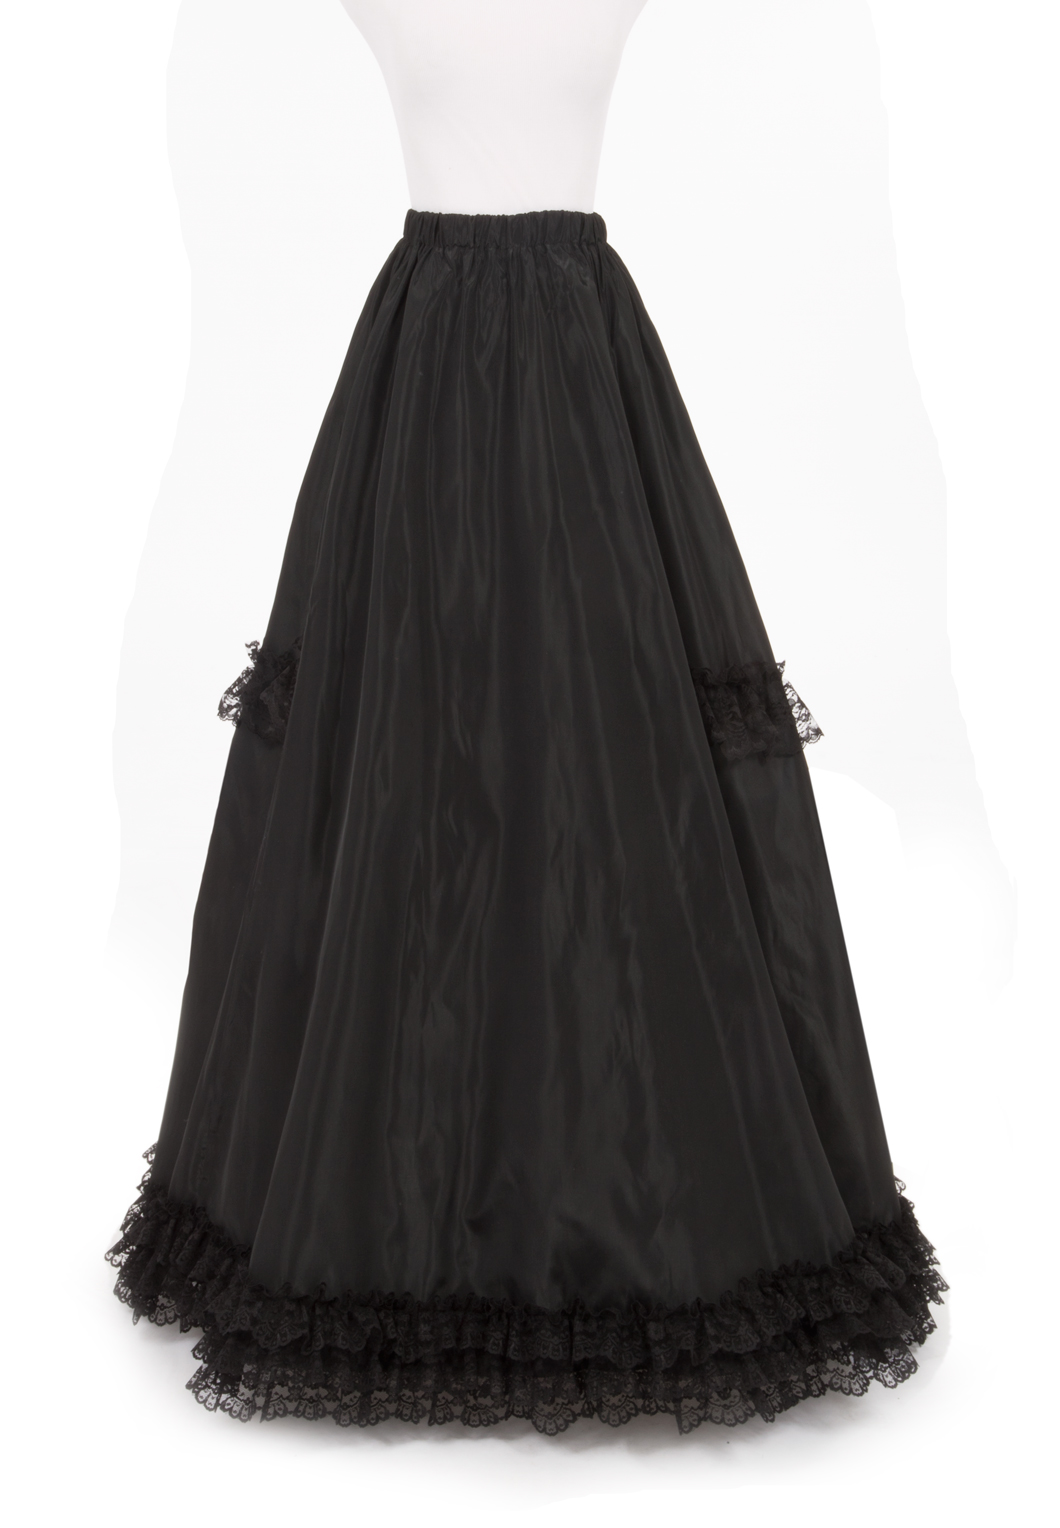 Countess Lucia Victorian Skirt | Recollections